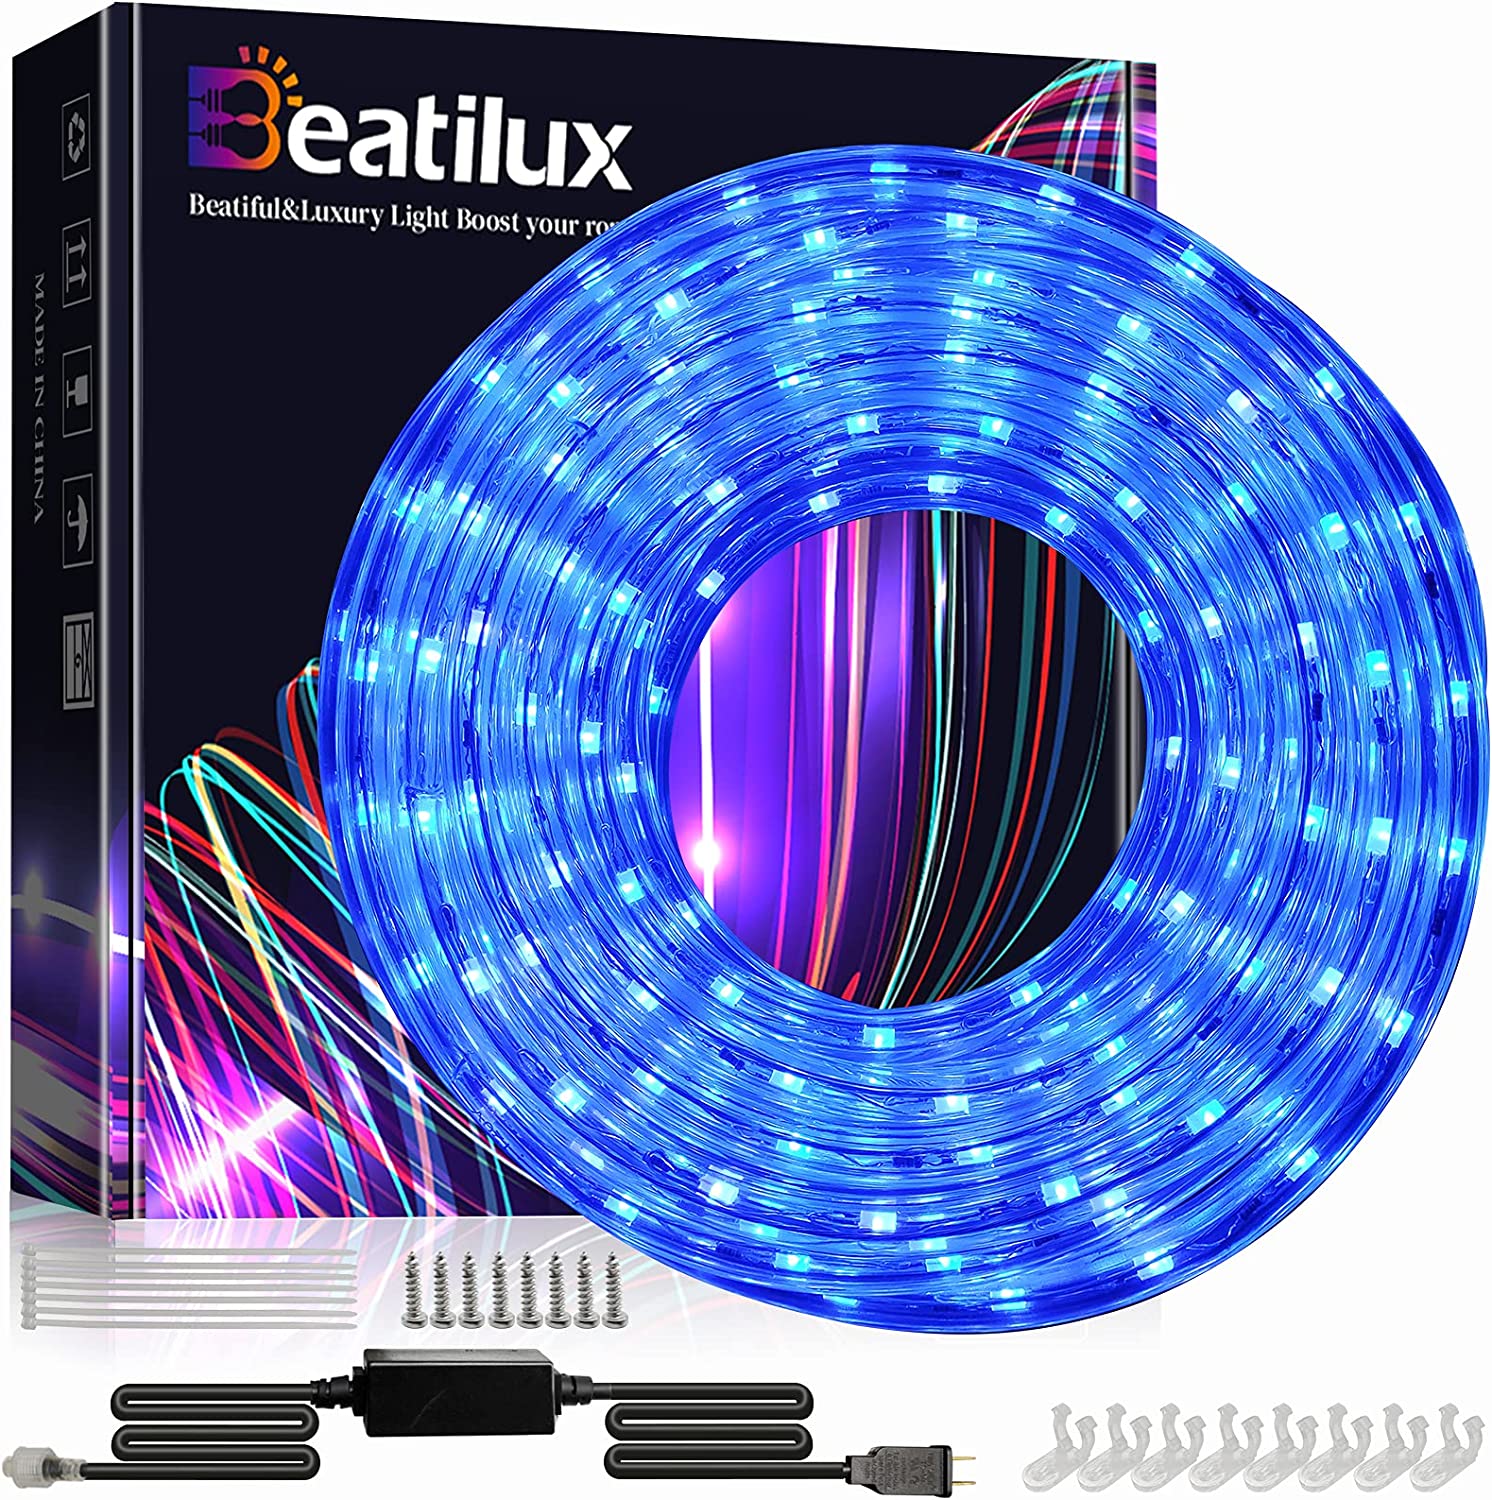 Beatilux 20FT LED Rope Lights Outdoor Waterproof,Bendable cuttable Rope Strip Lights for Garden Pool Bedroom Stairs Christmas Holiday Dec